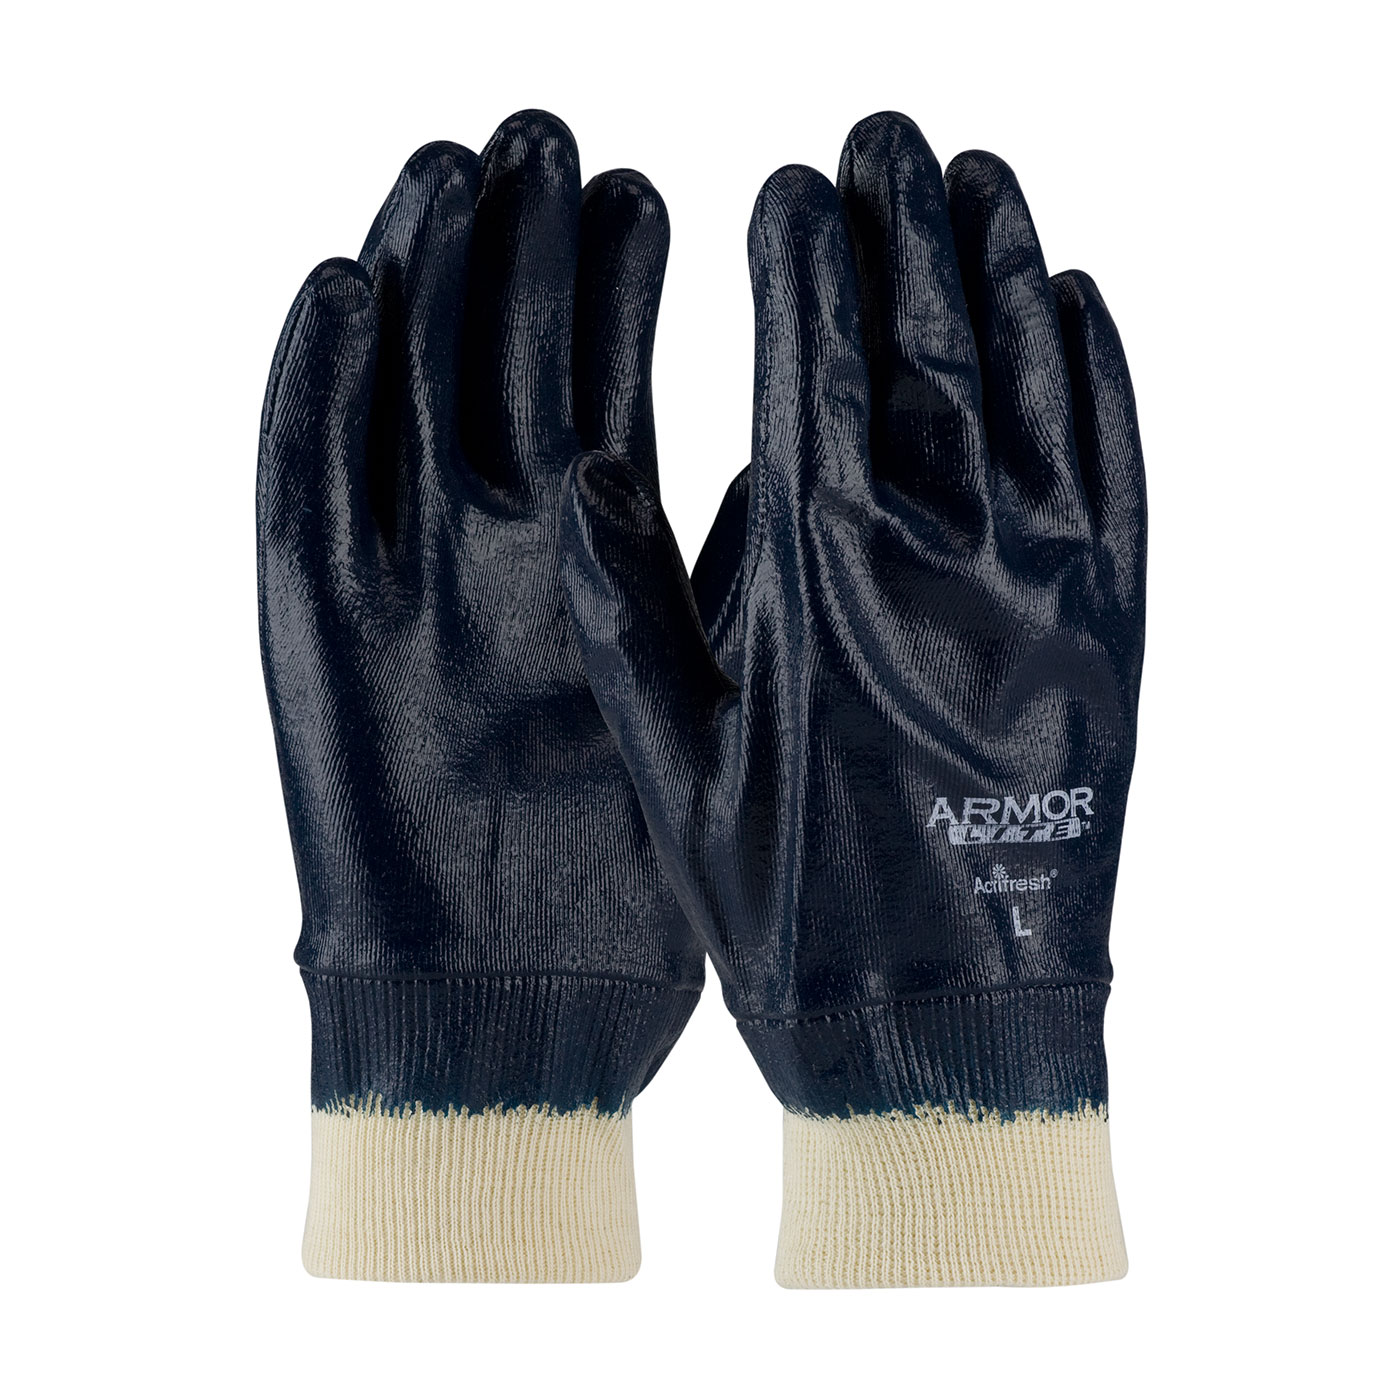 56-3171 PIP® ArmorLite® Nitrile Dipped Glove with Interlock Liner and Textured Finish on Hand - Knitwrist